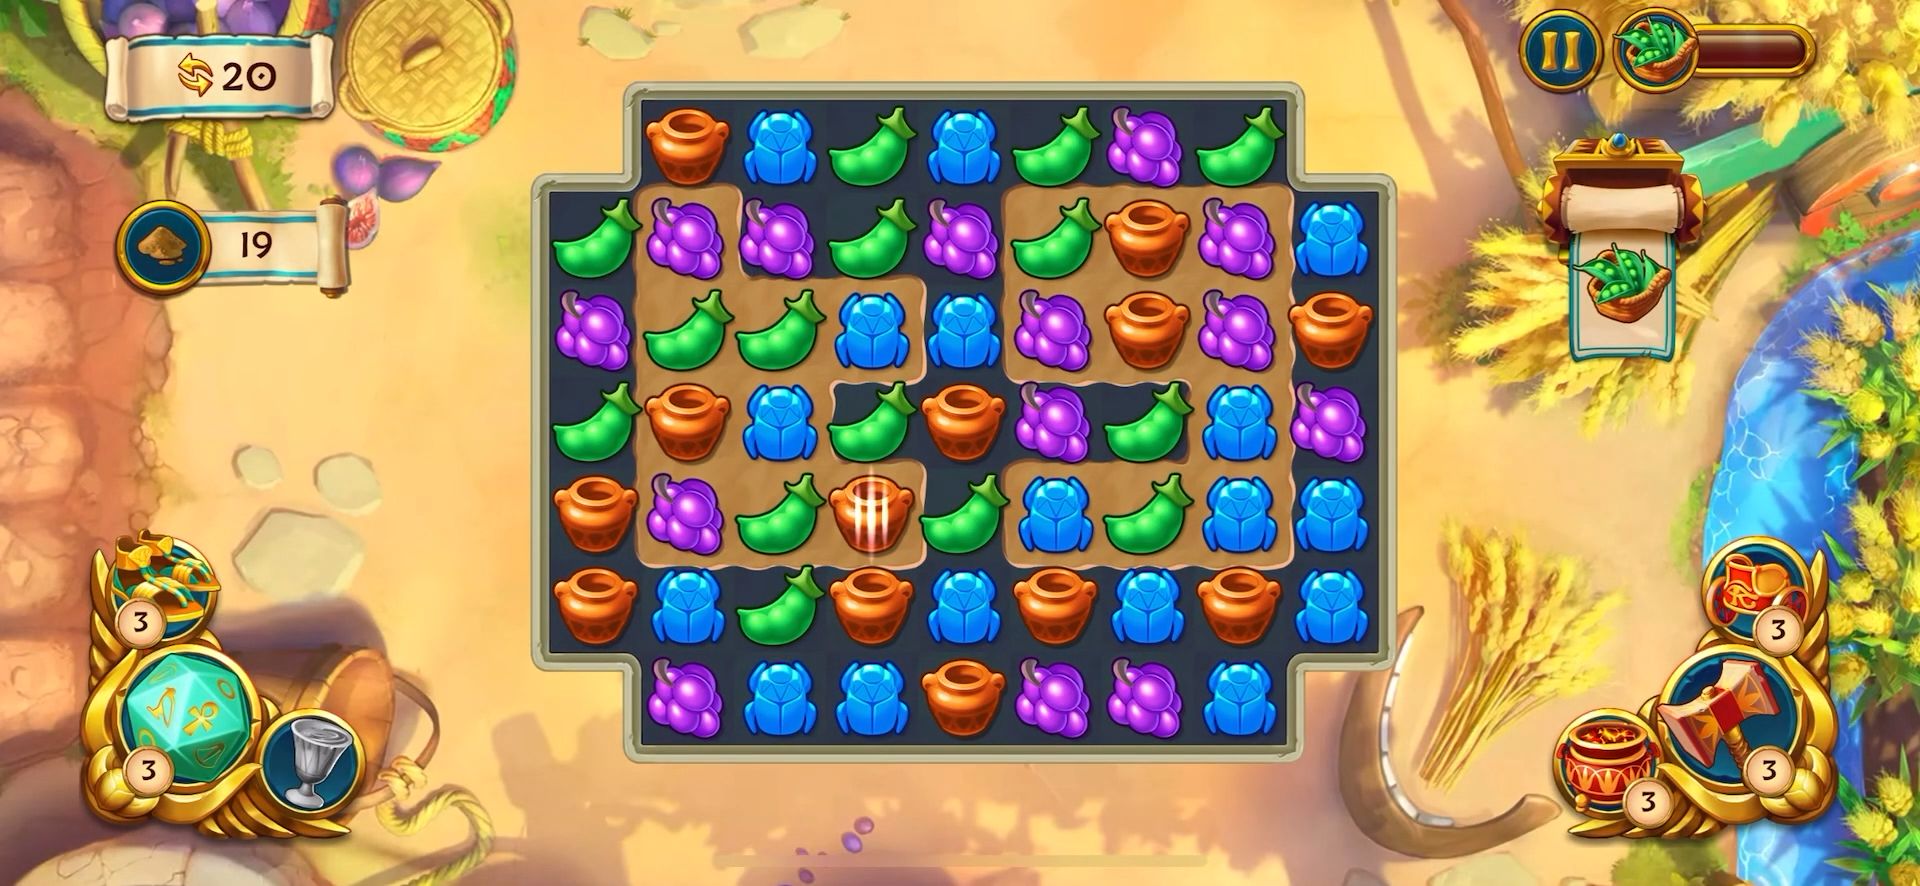 jewels of egypt: match 3 puzzle game